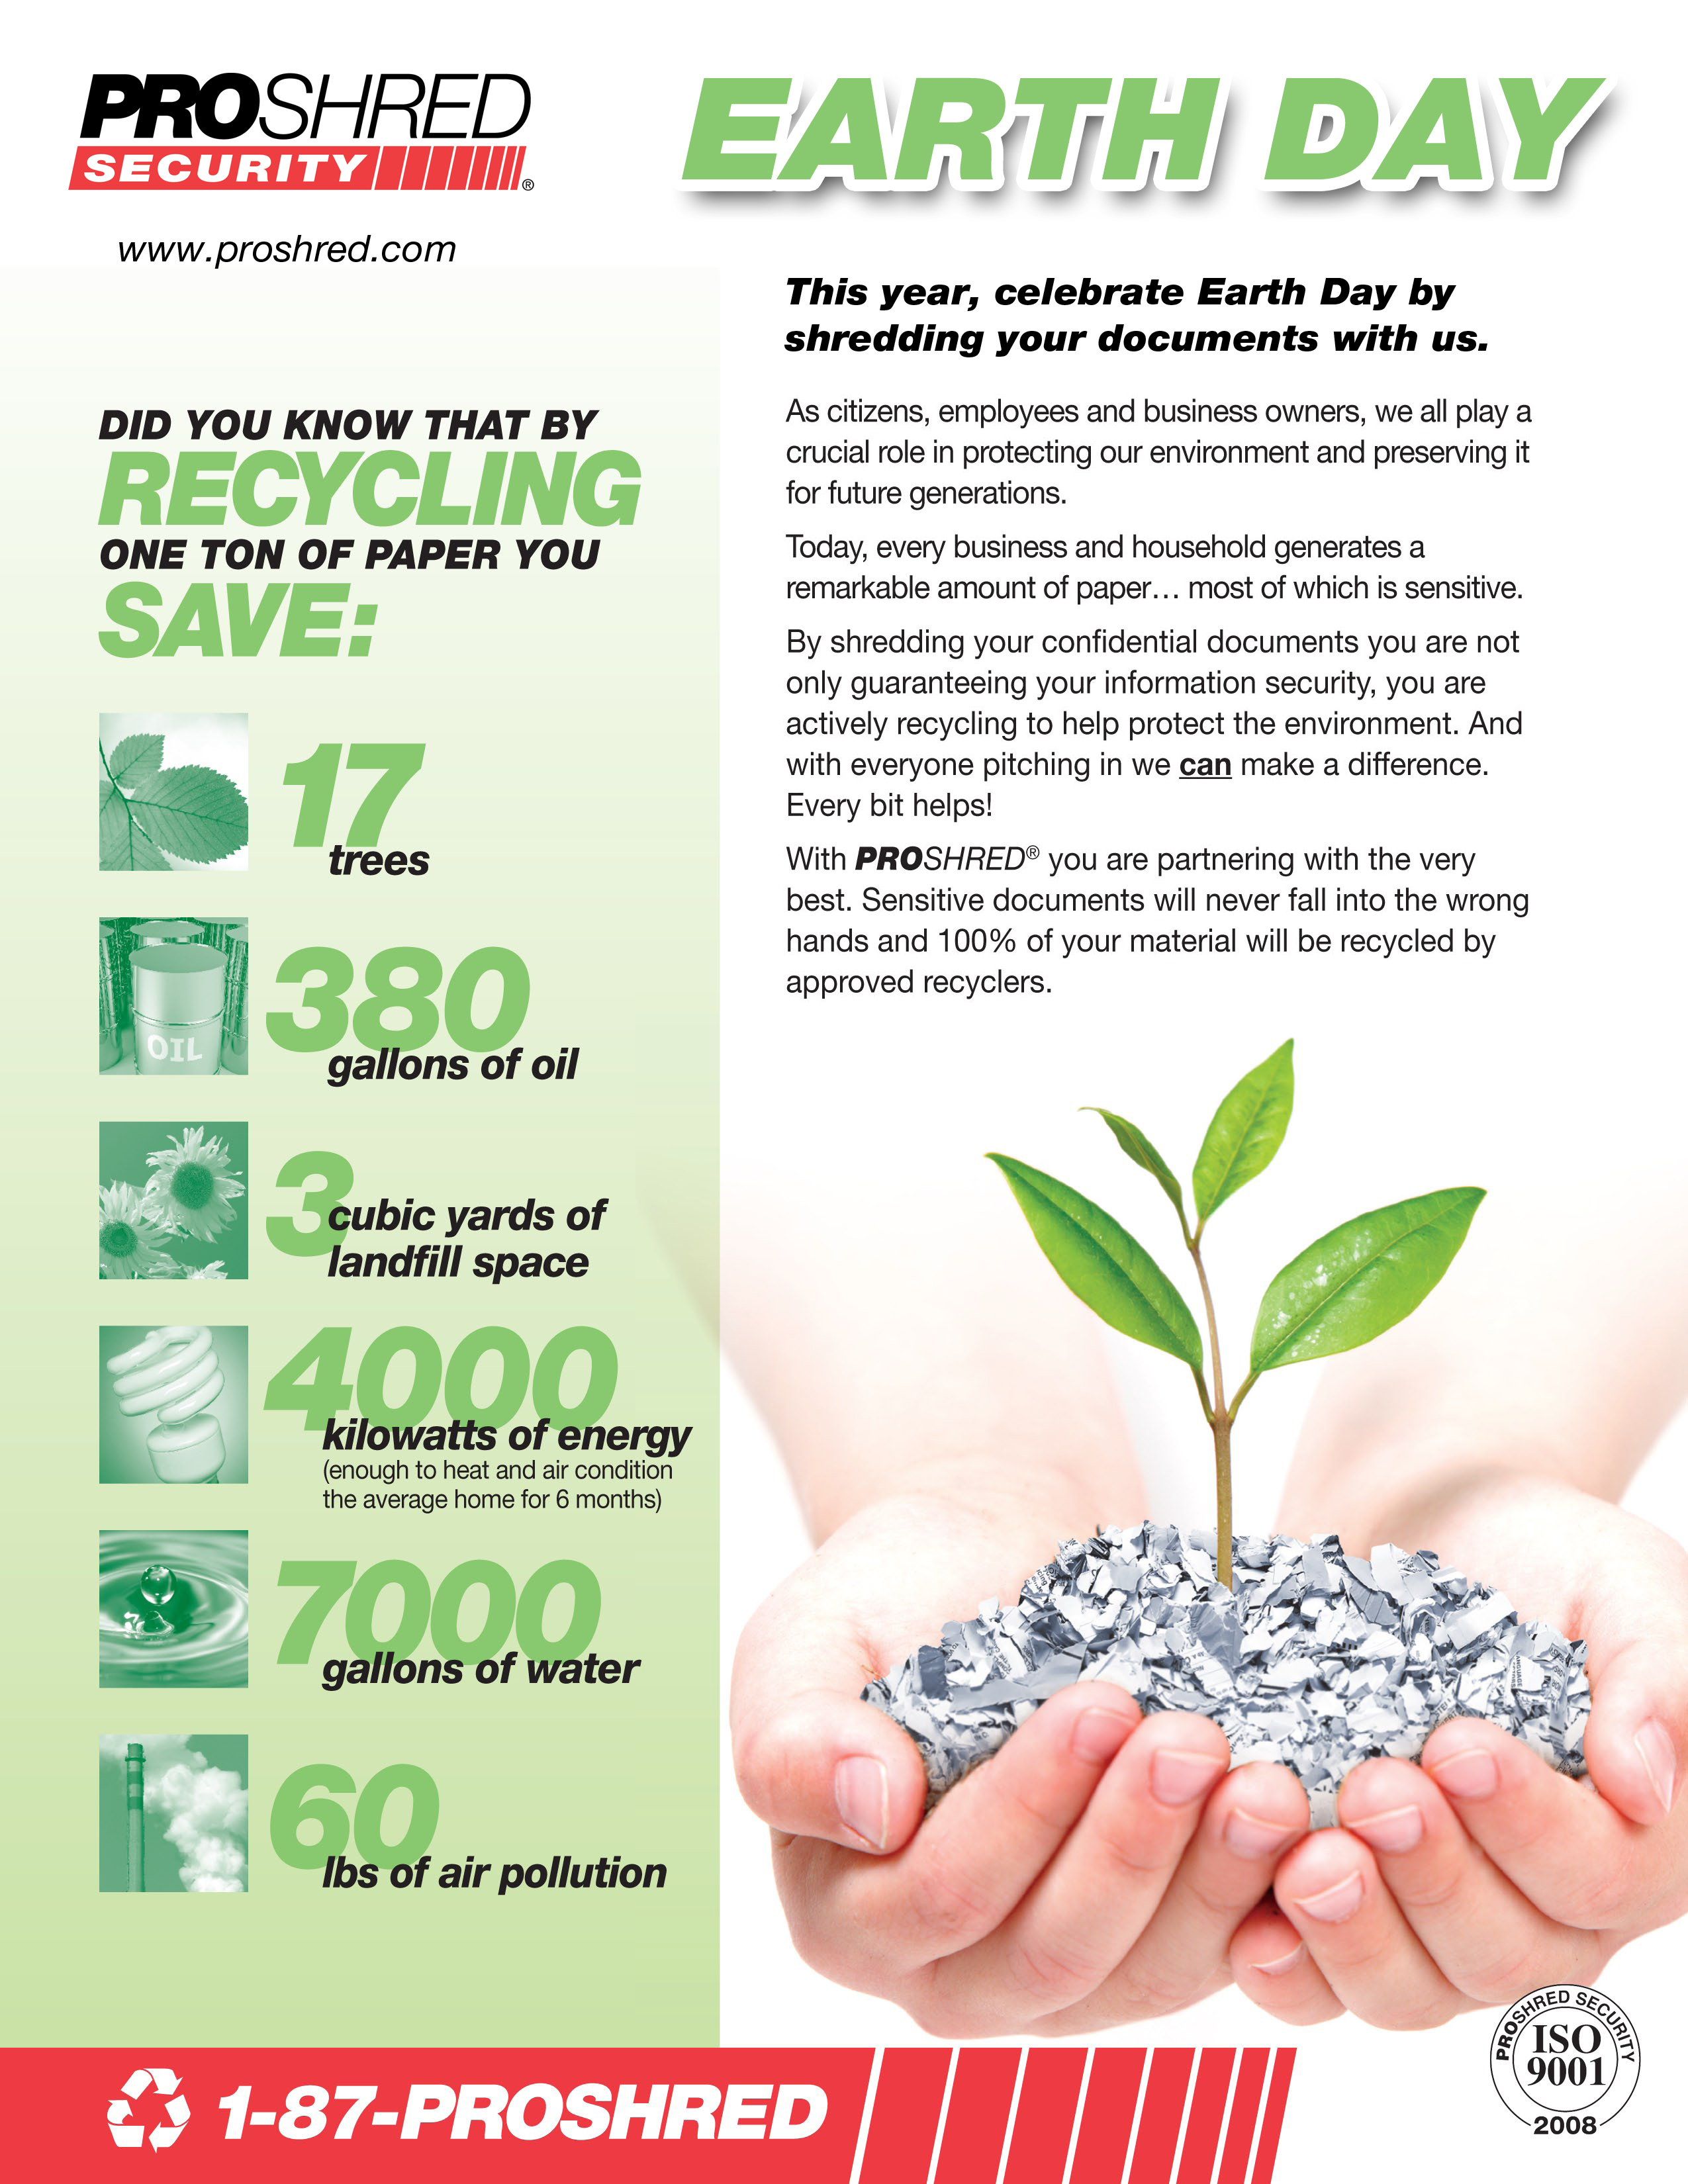 Earth Day 2014 : Benefits of shredding with PROSHRED